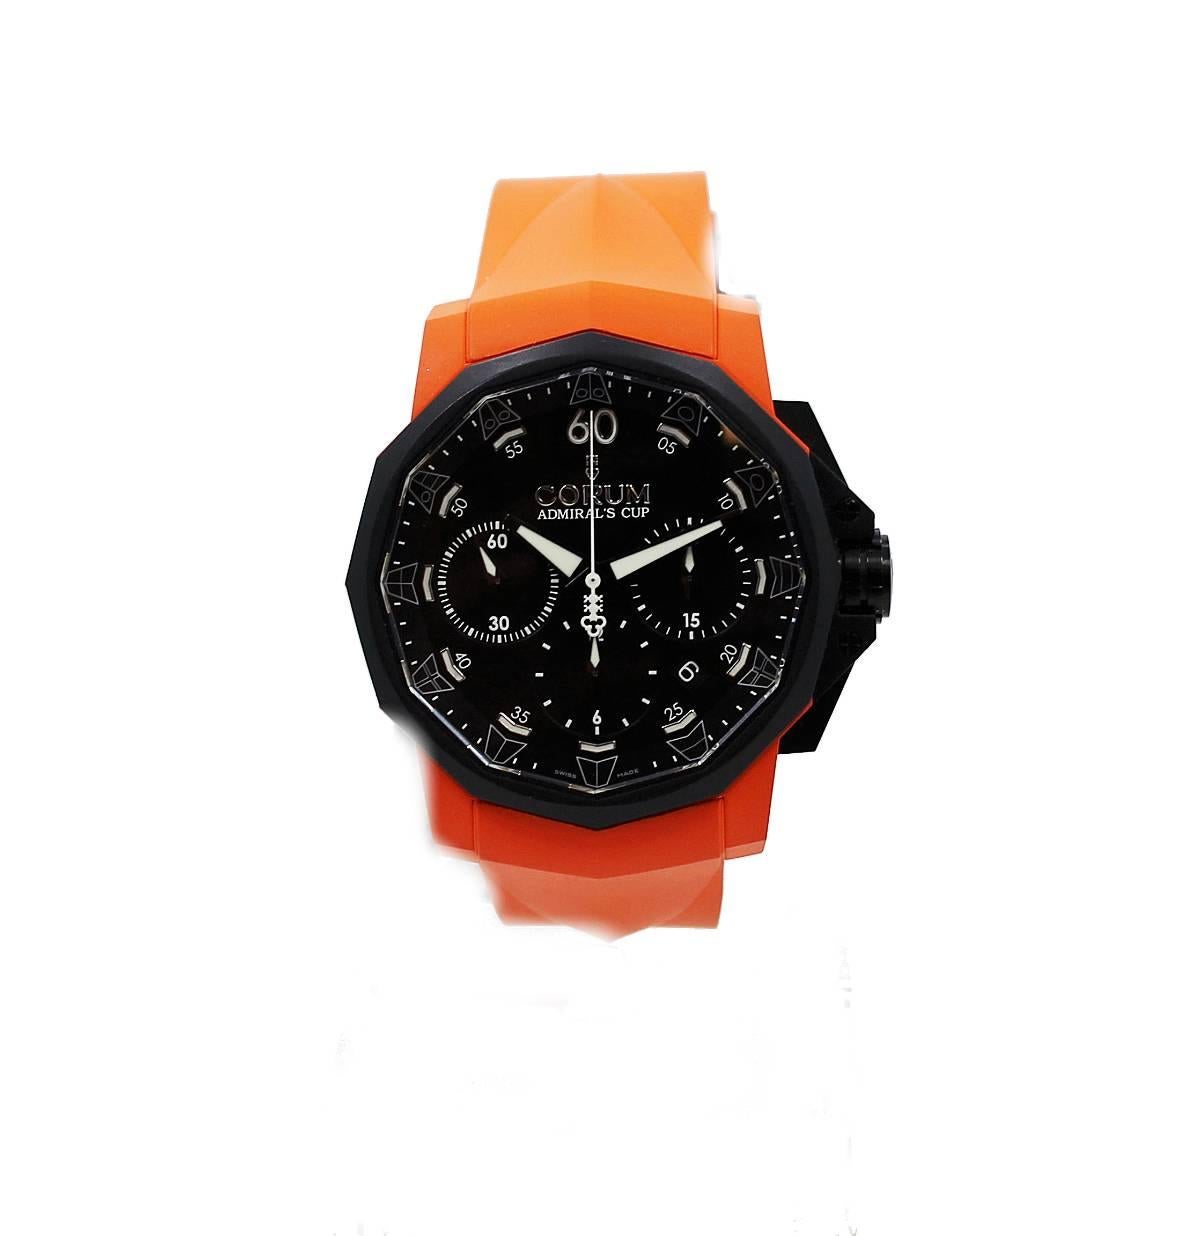 Corum Admiral's Cup Challenger 44 Chronograph  Titanium Limited Edition Watch #46/120 (Model#753.814.02/F374). This exclusive limited edition watch comes in a Orange Rubber Case and Strap with deployment Buckle.It is 42mm, Chronograph Automatic